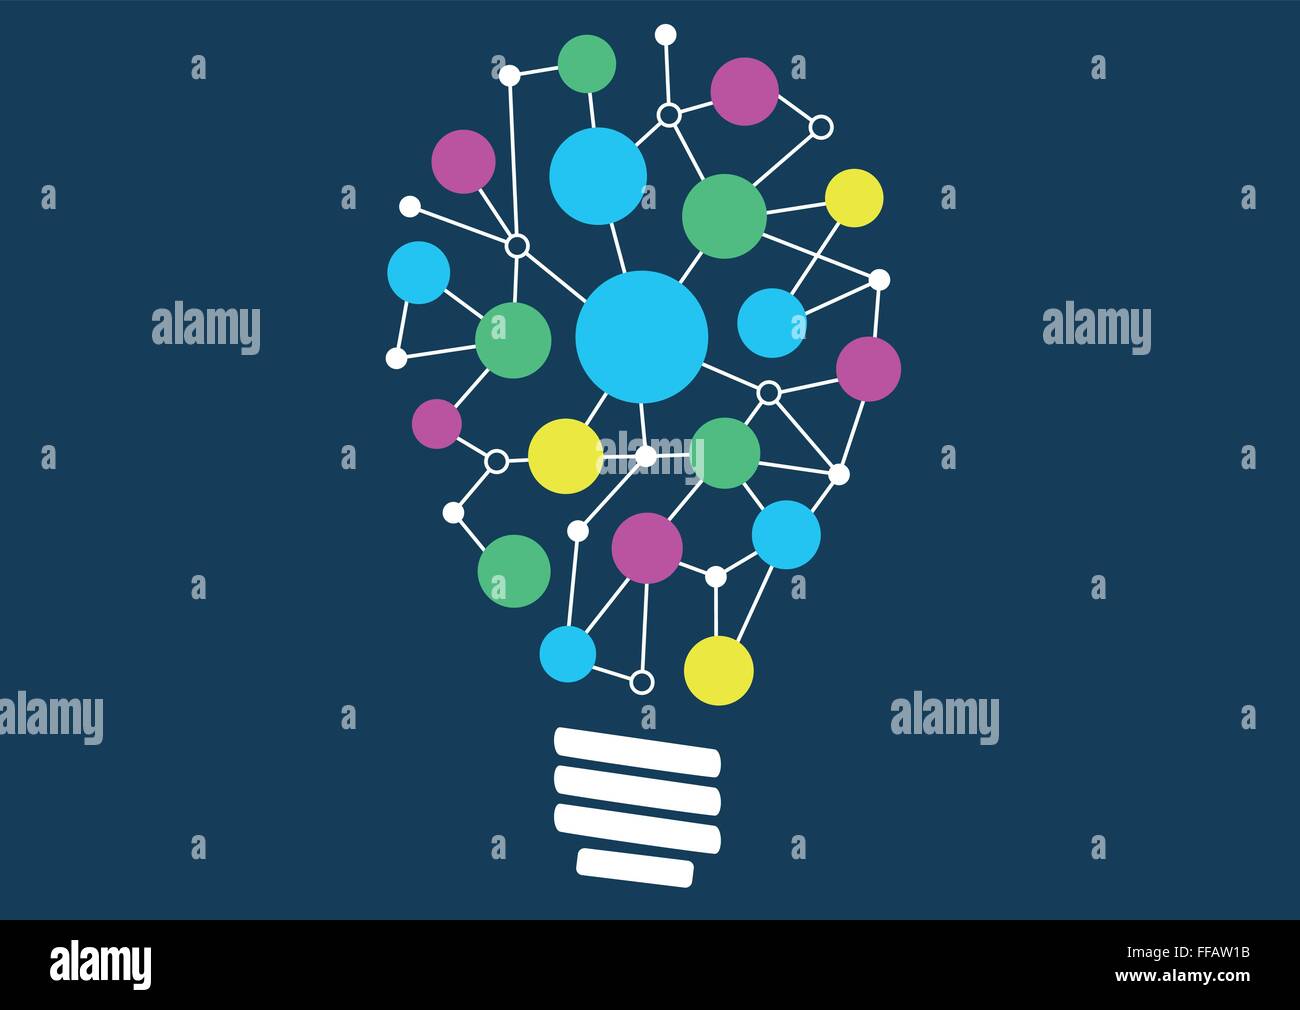 Vector illustration of light bulb with network of different objects or ideas. Concept of ideation or creativity. Stock Vector